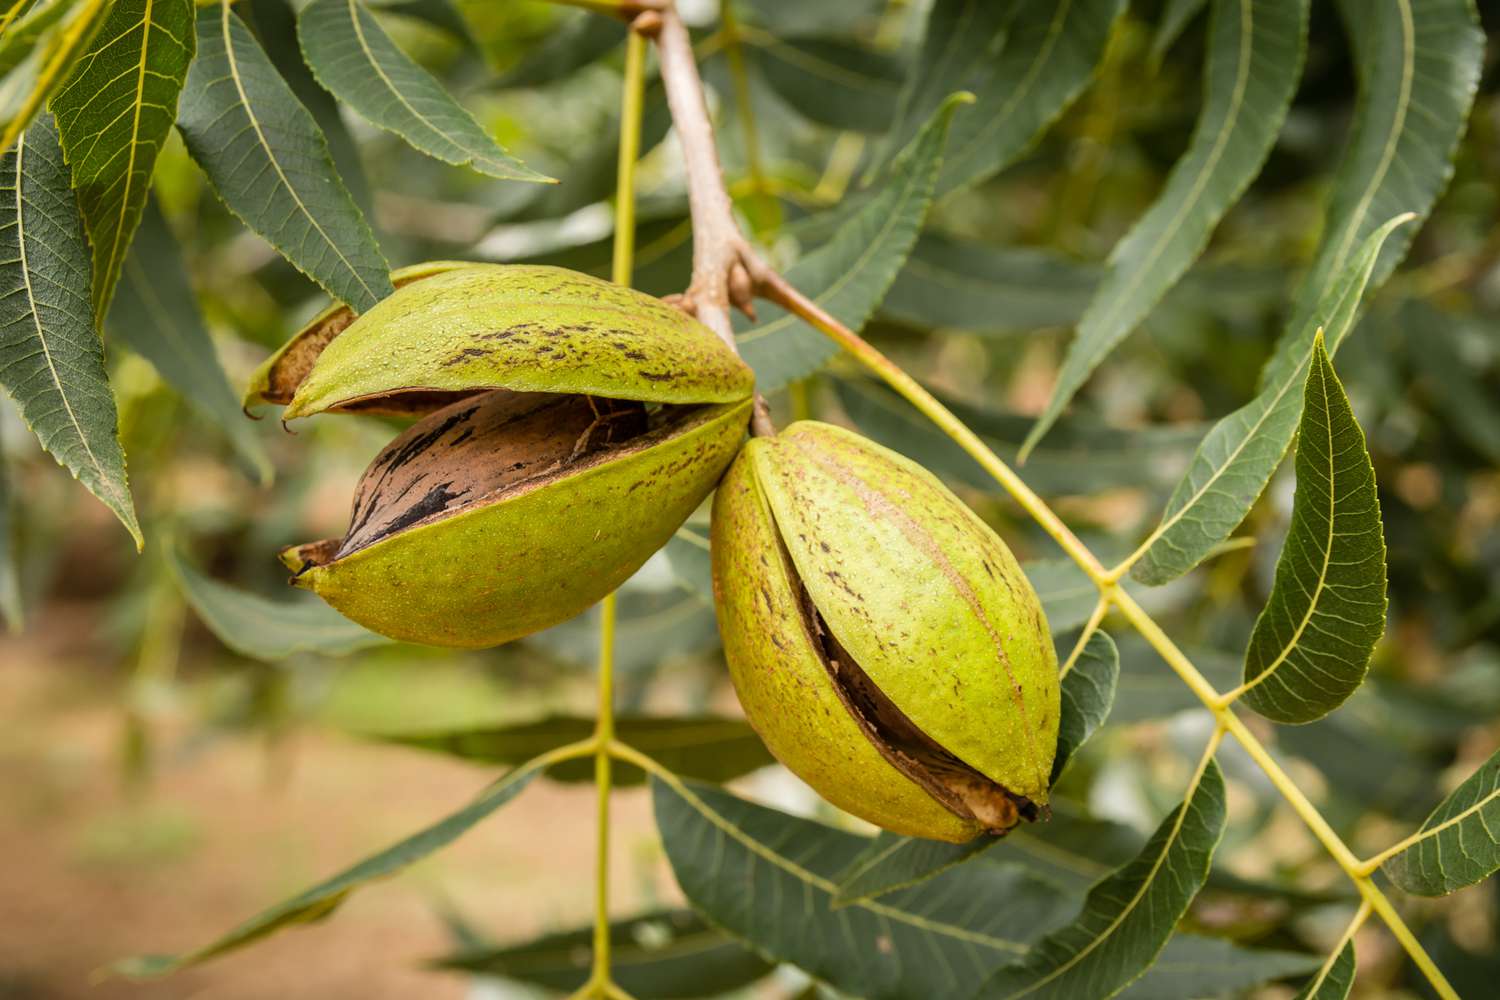 Ripe pecans opening on the tree